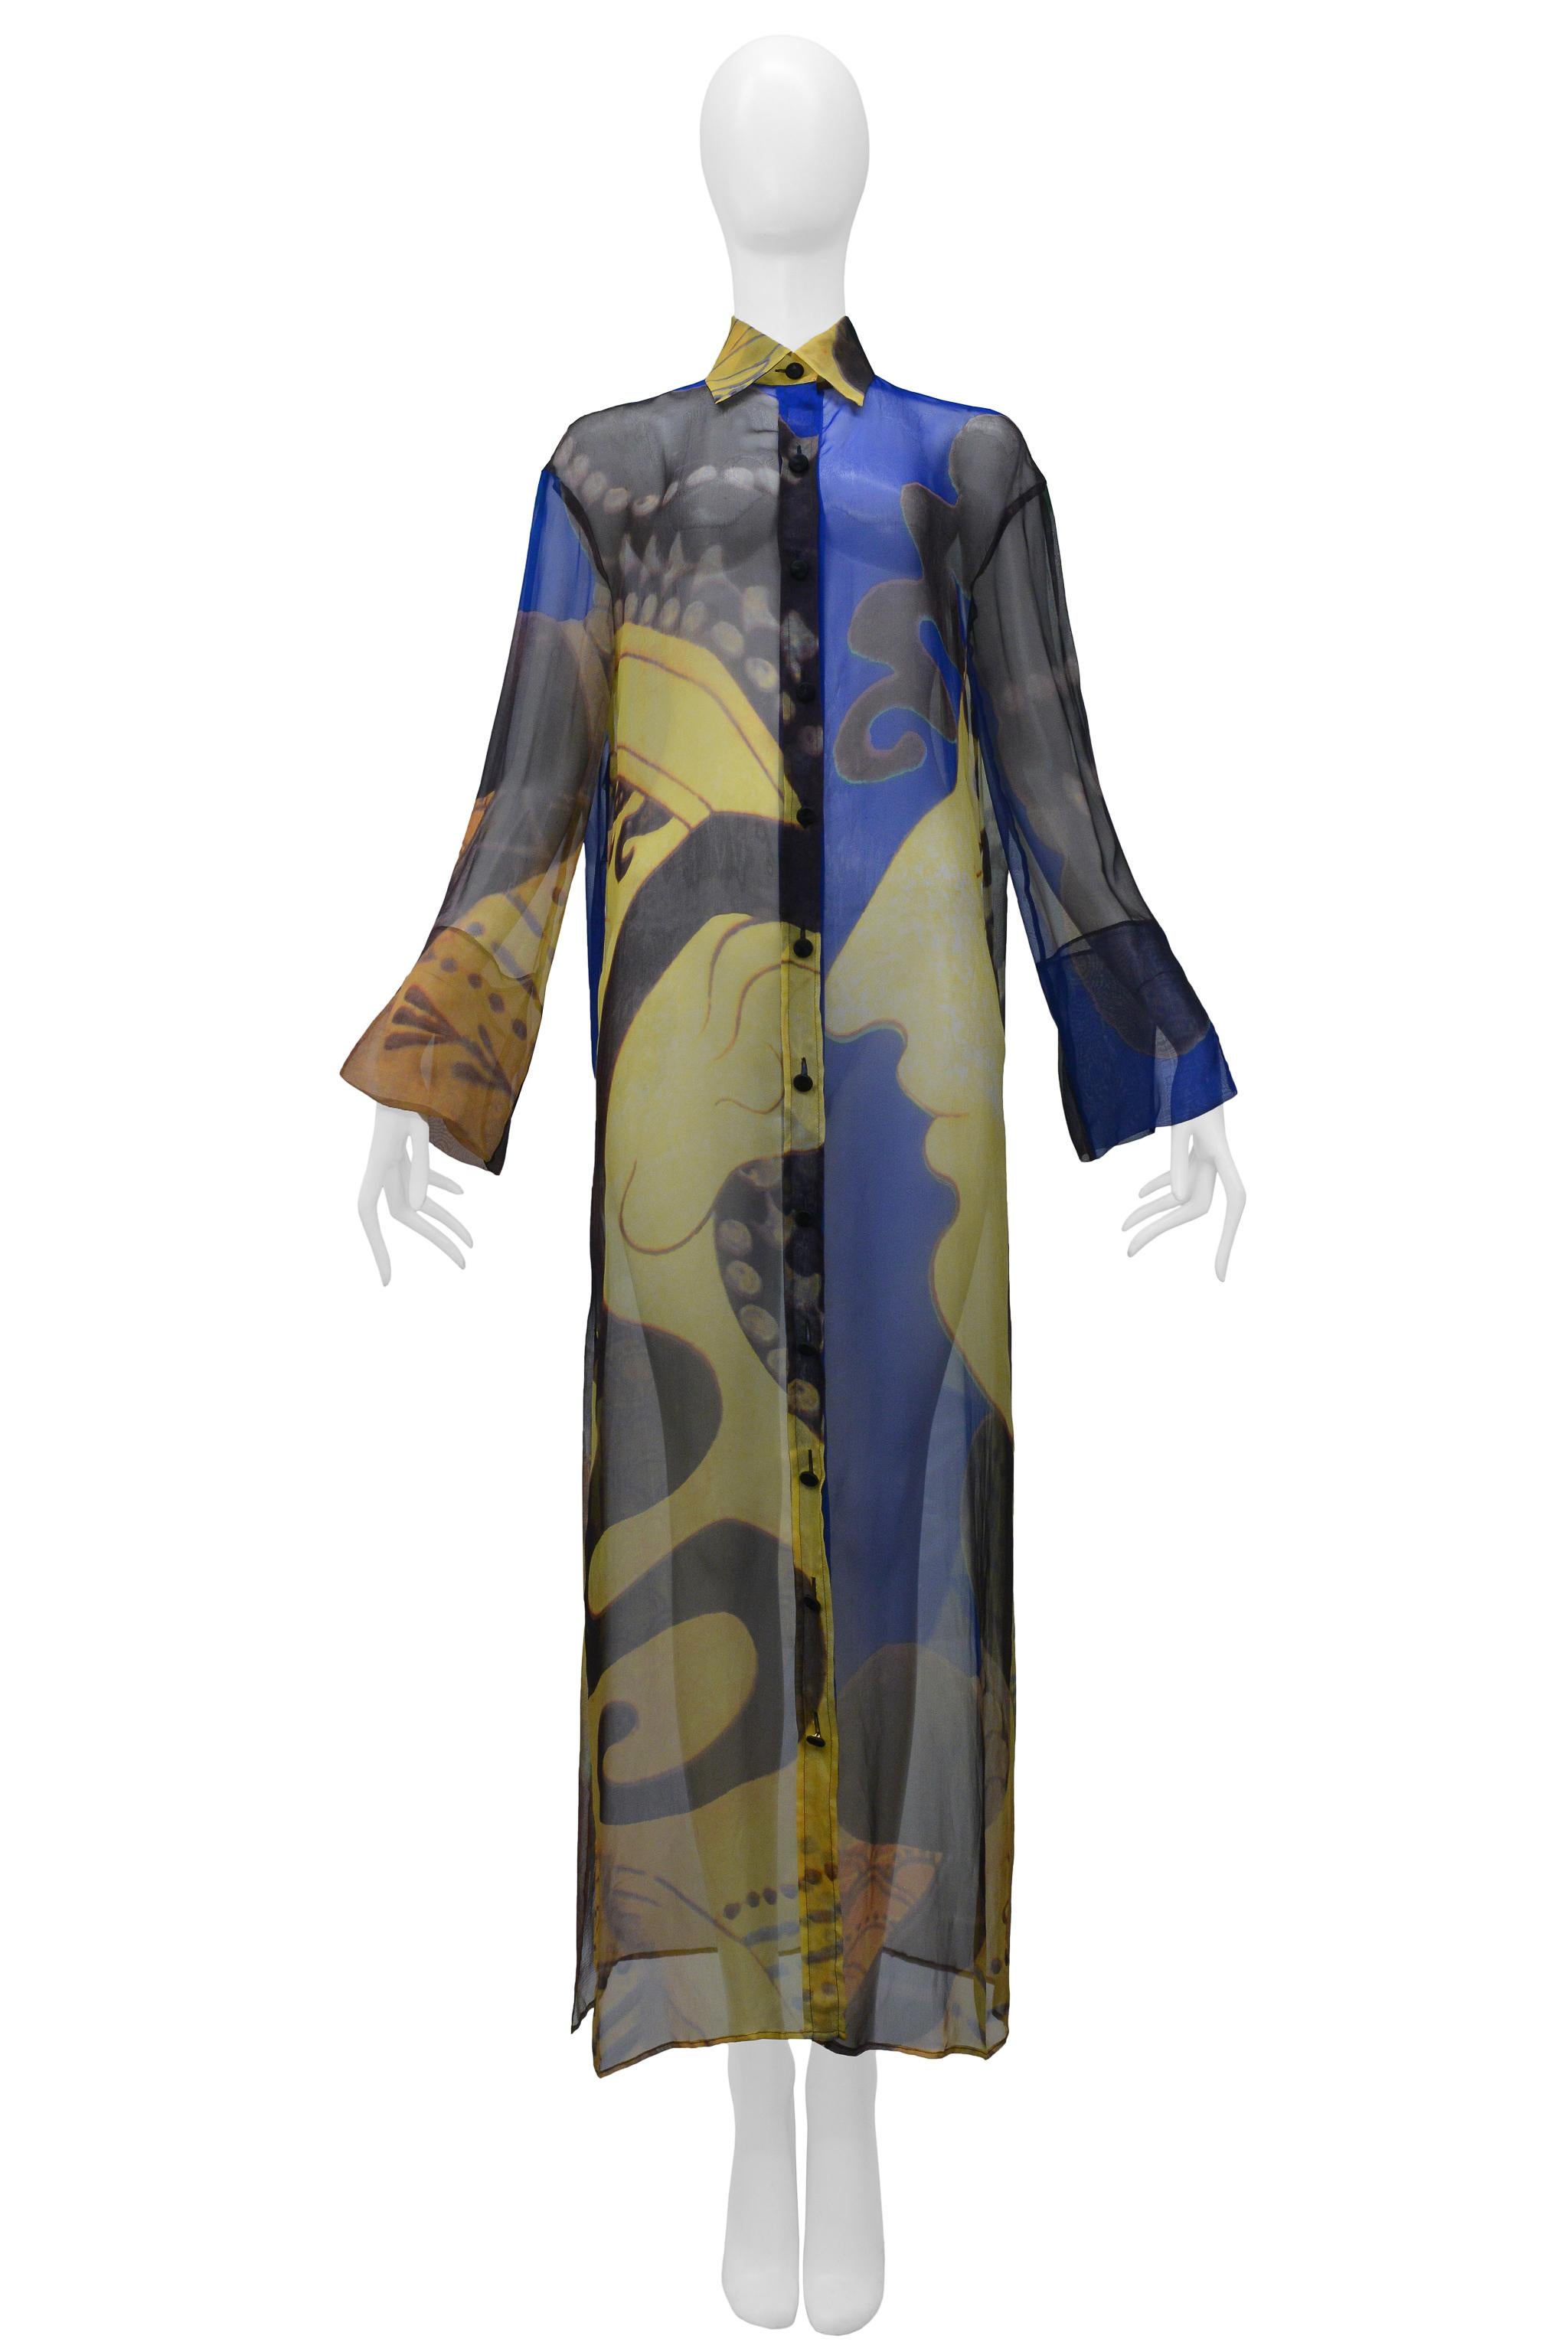 Resurrection Vintage is excited to offer a vintage Gianfranco Ferre multicolor chiffon caftan shirt dress featuring decorative print, slit cuffs, button front placket, and folding collar. 

Gianfranco Ferre
Size 40
Silk, Polyester 
Excellent Vintage